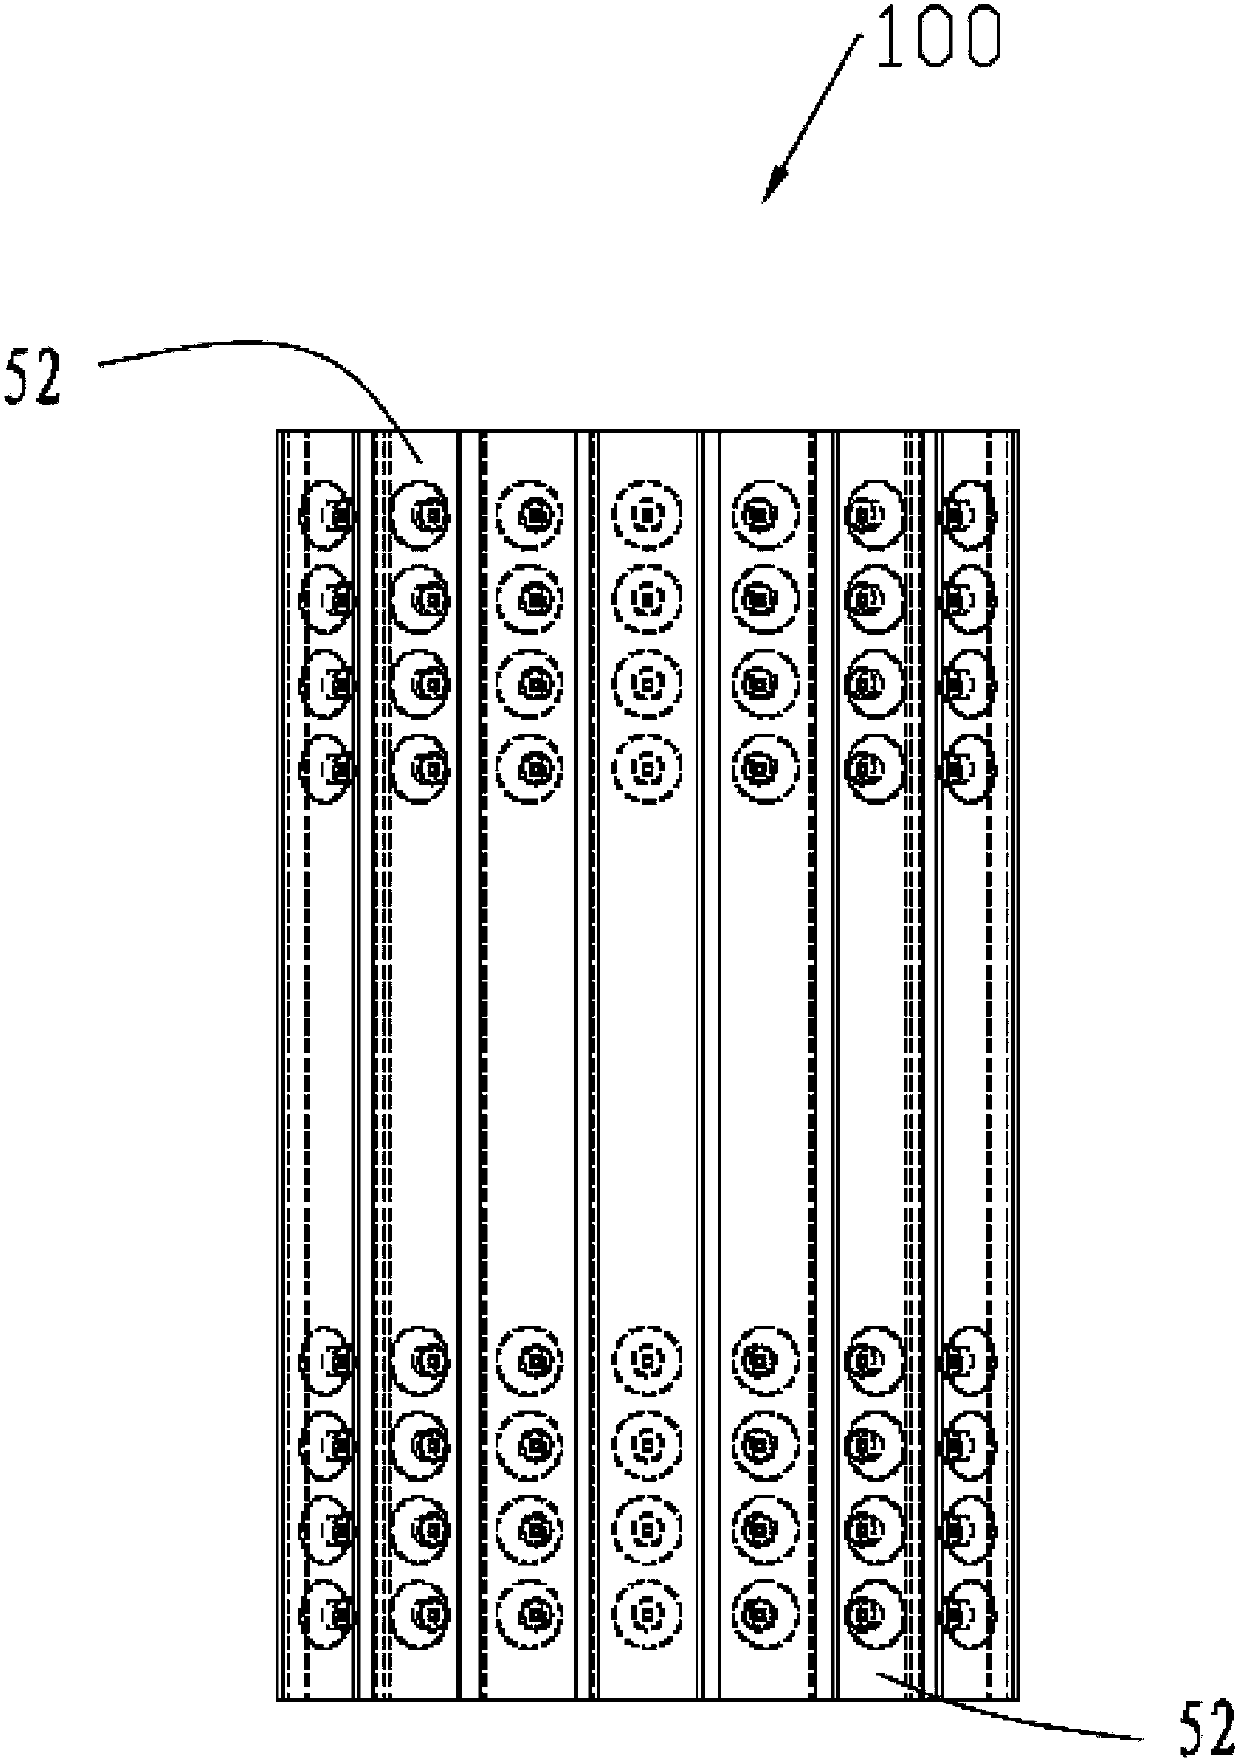 Trimming structure and LED (light emitting diode) lamp adopting trimming structure